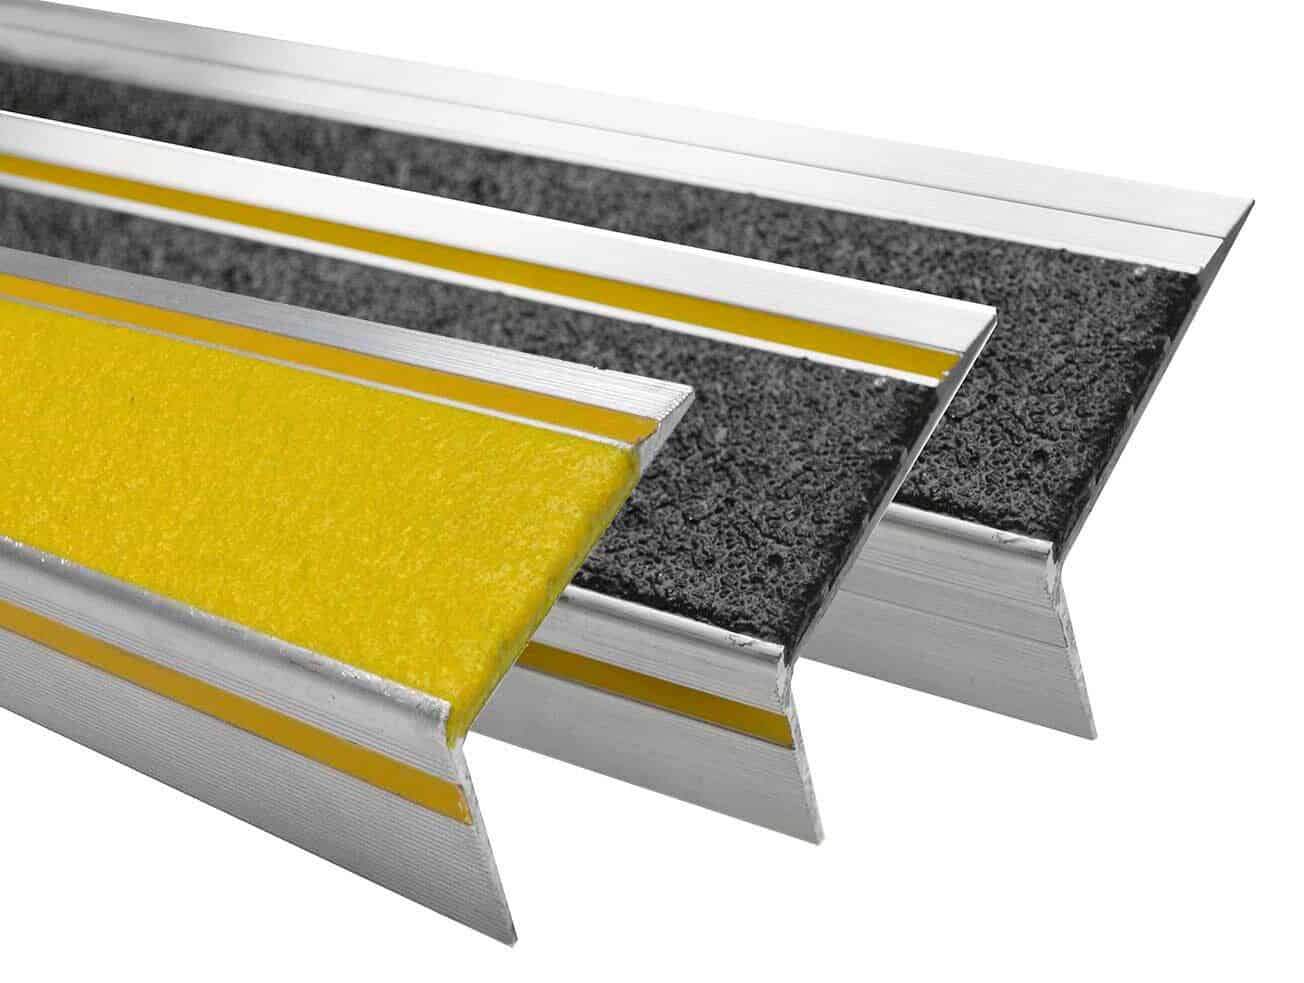 Bold Step Aluminum Renovation Stair Treads in yellow and silver.